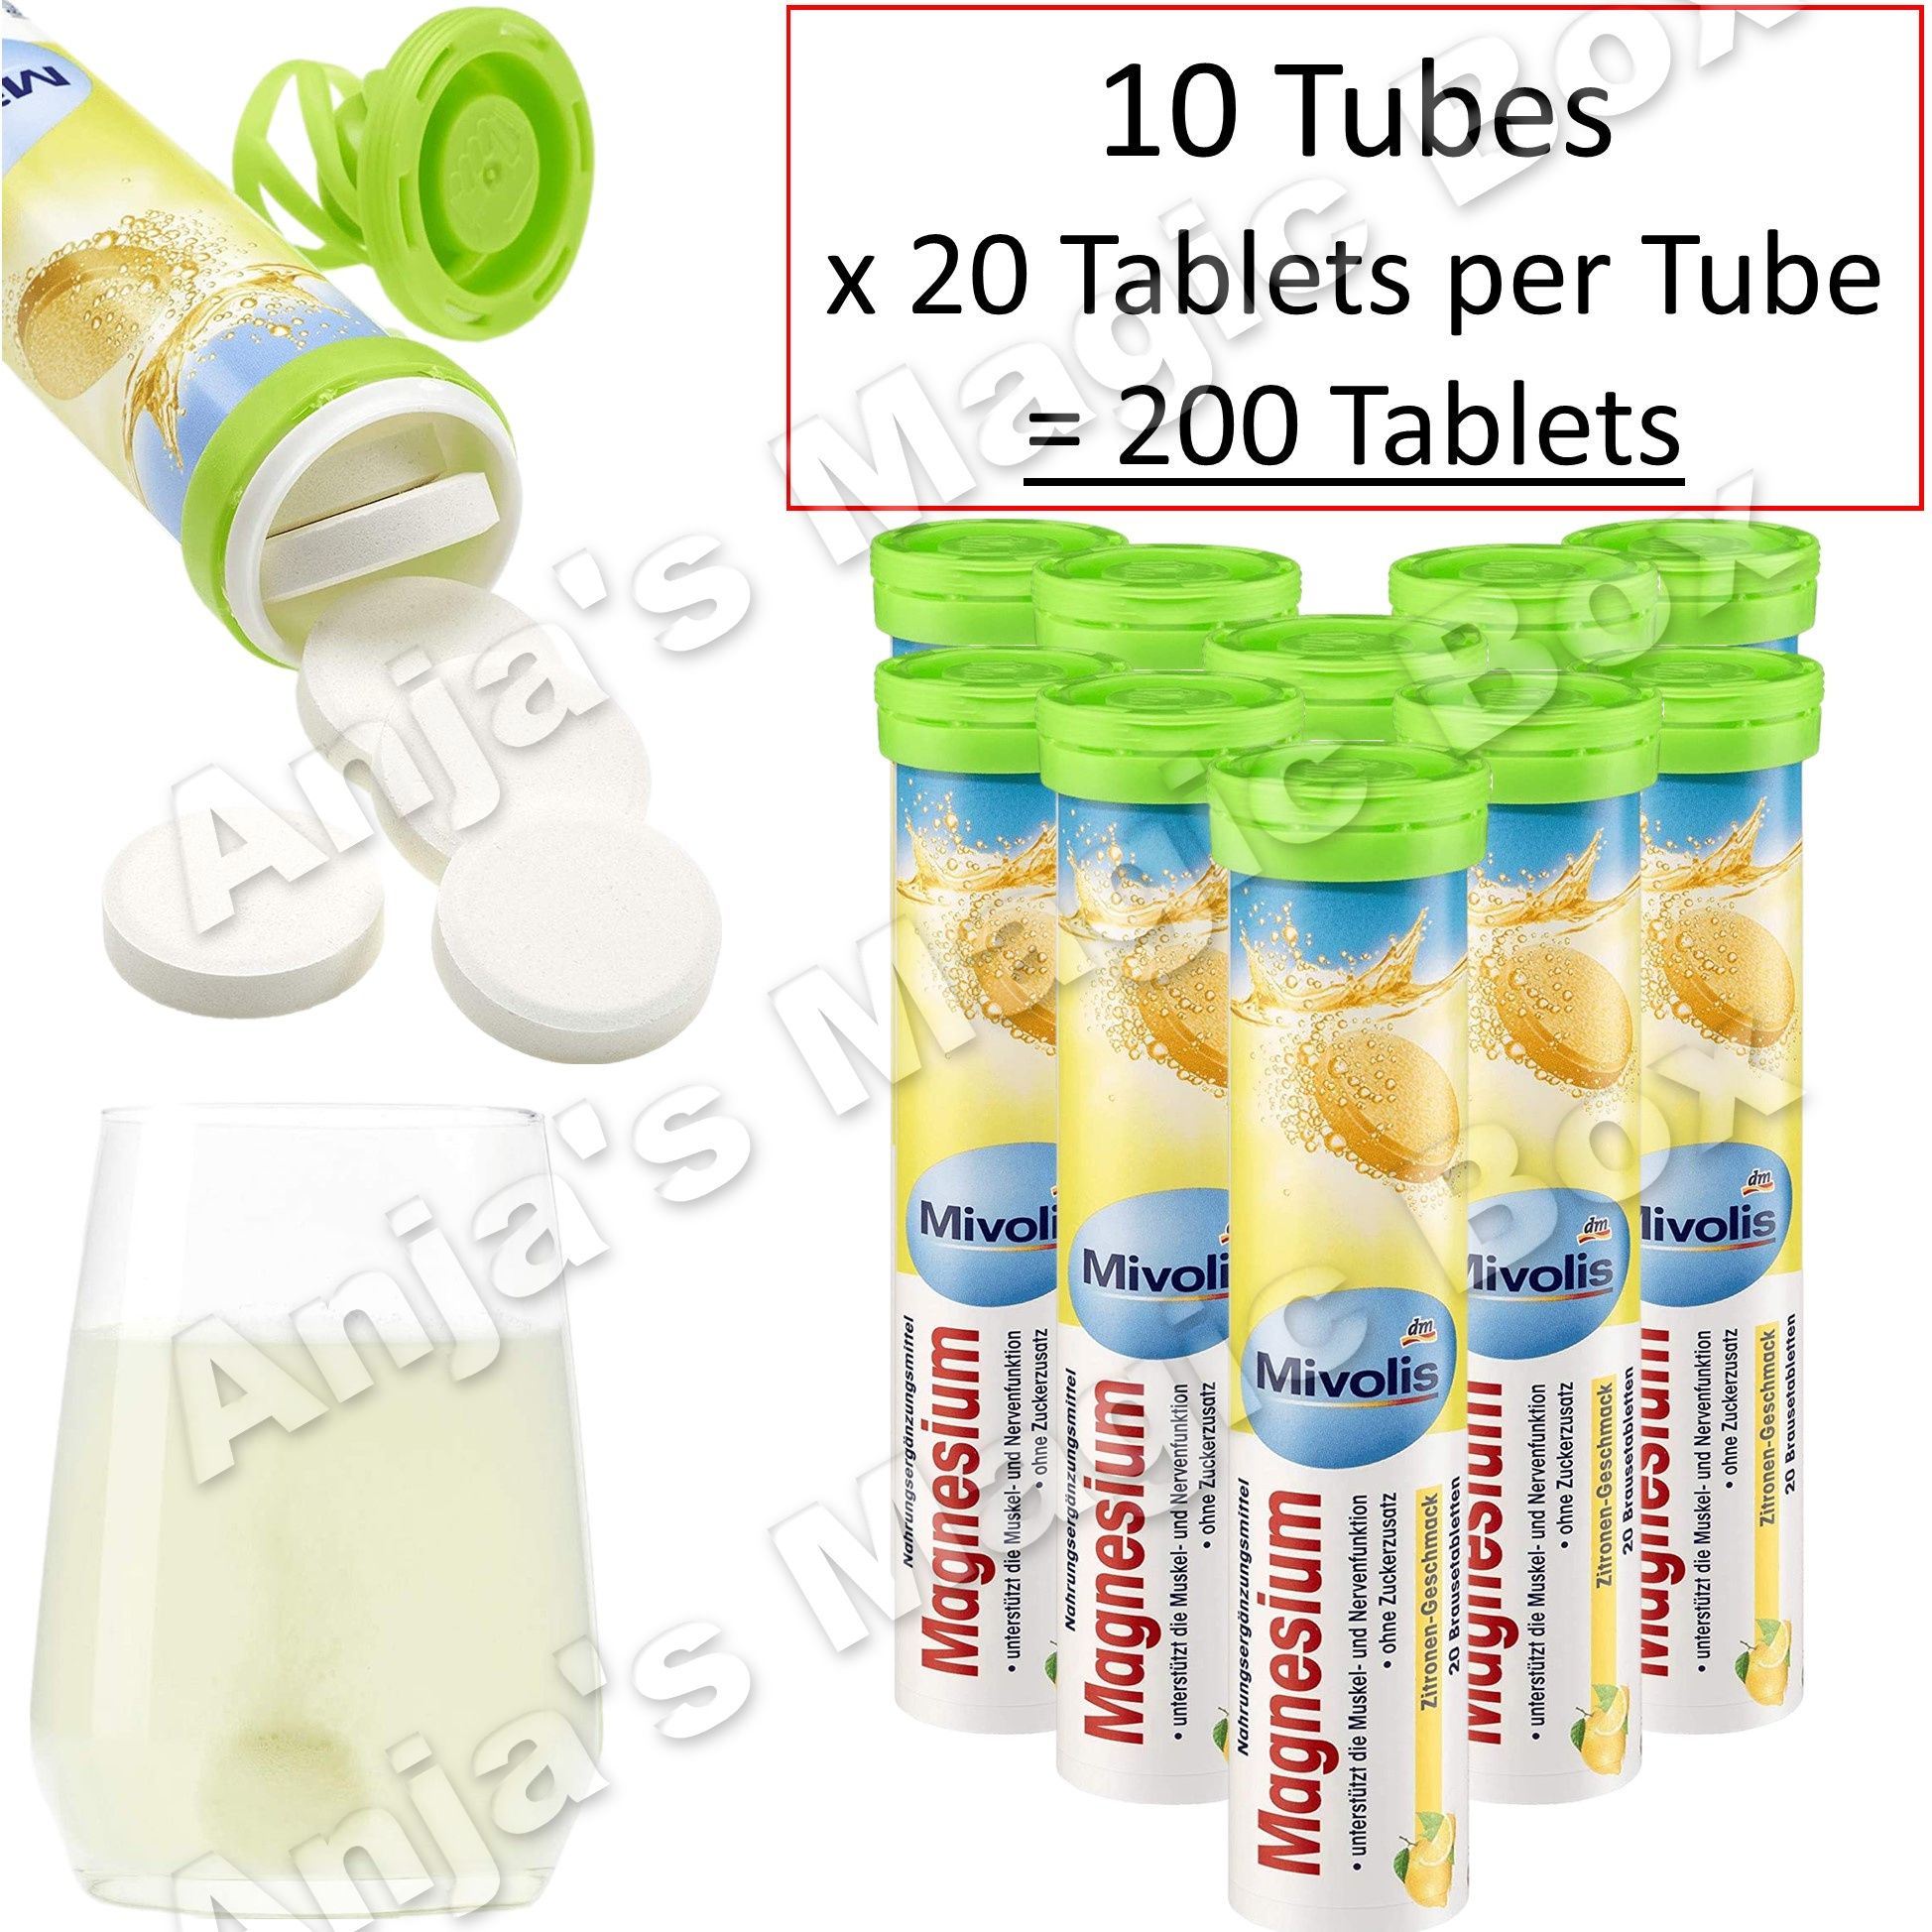 buy 10 Tubes of Magnesium Tablets on eBay